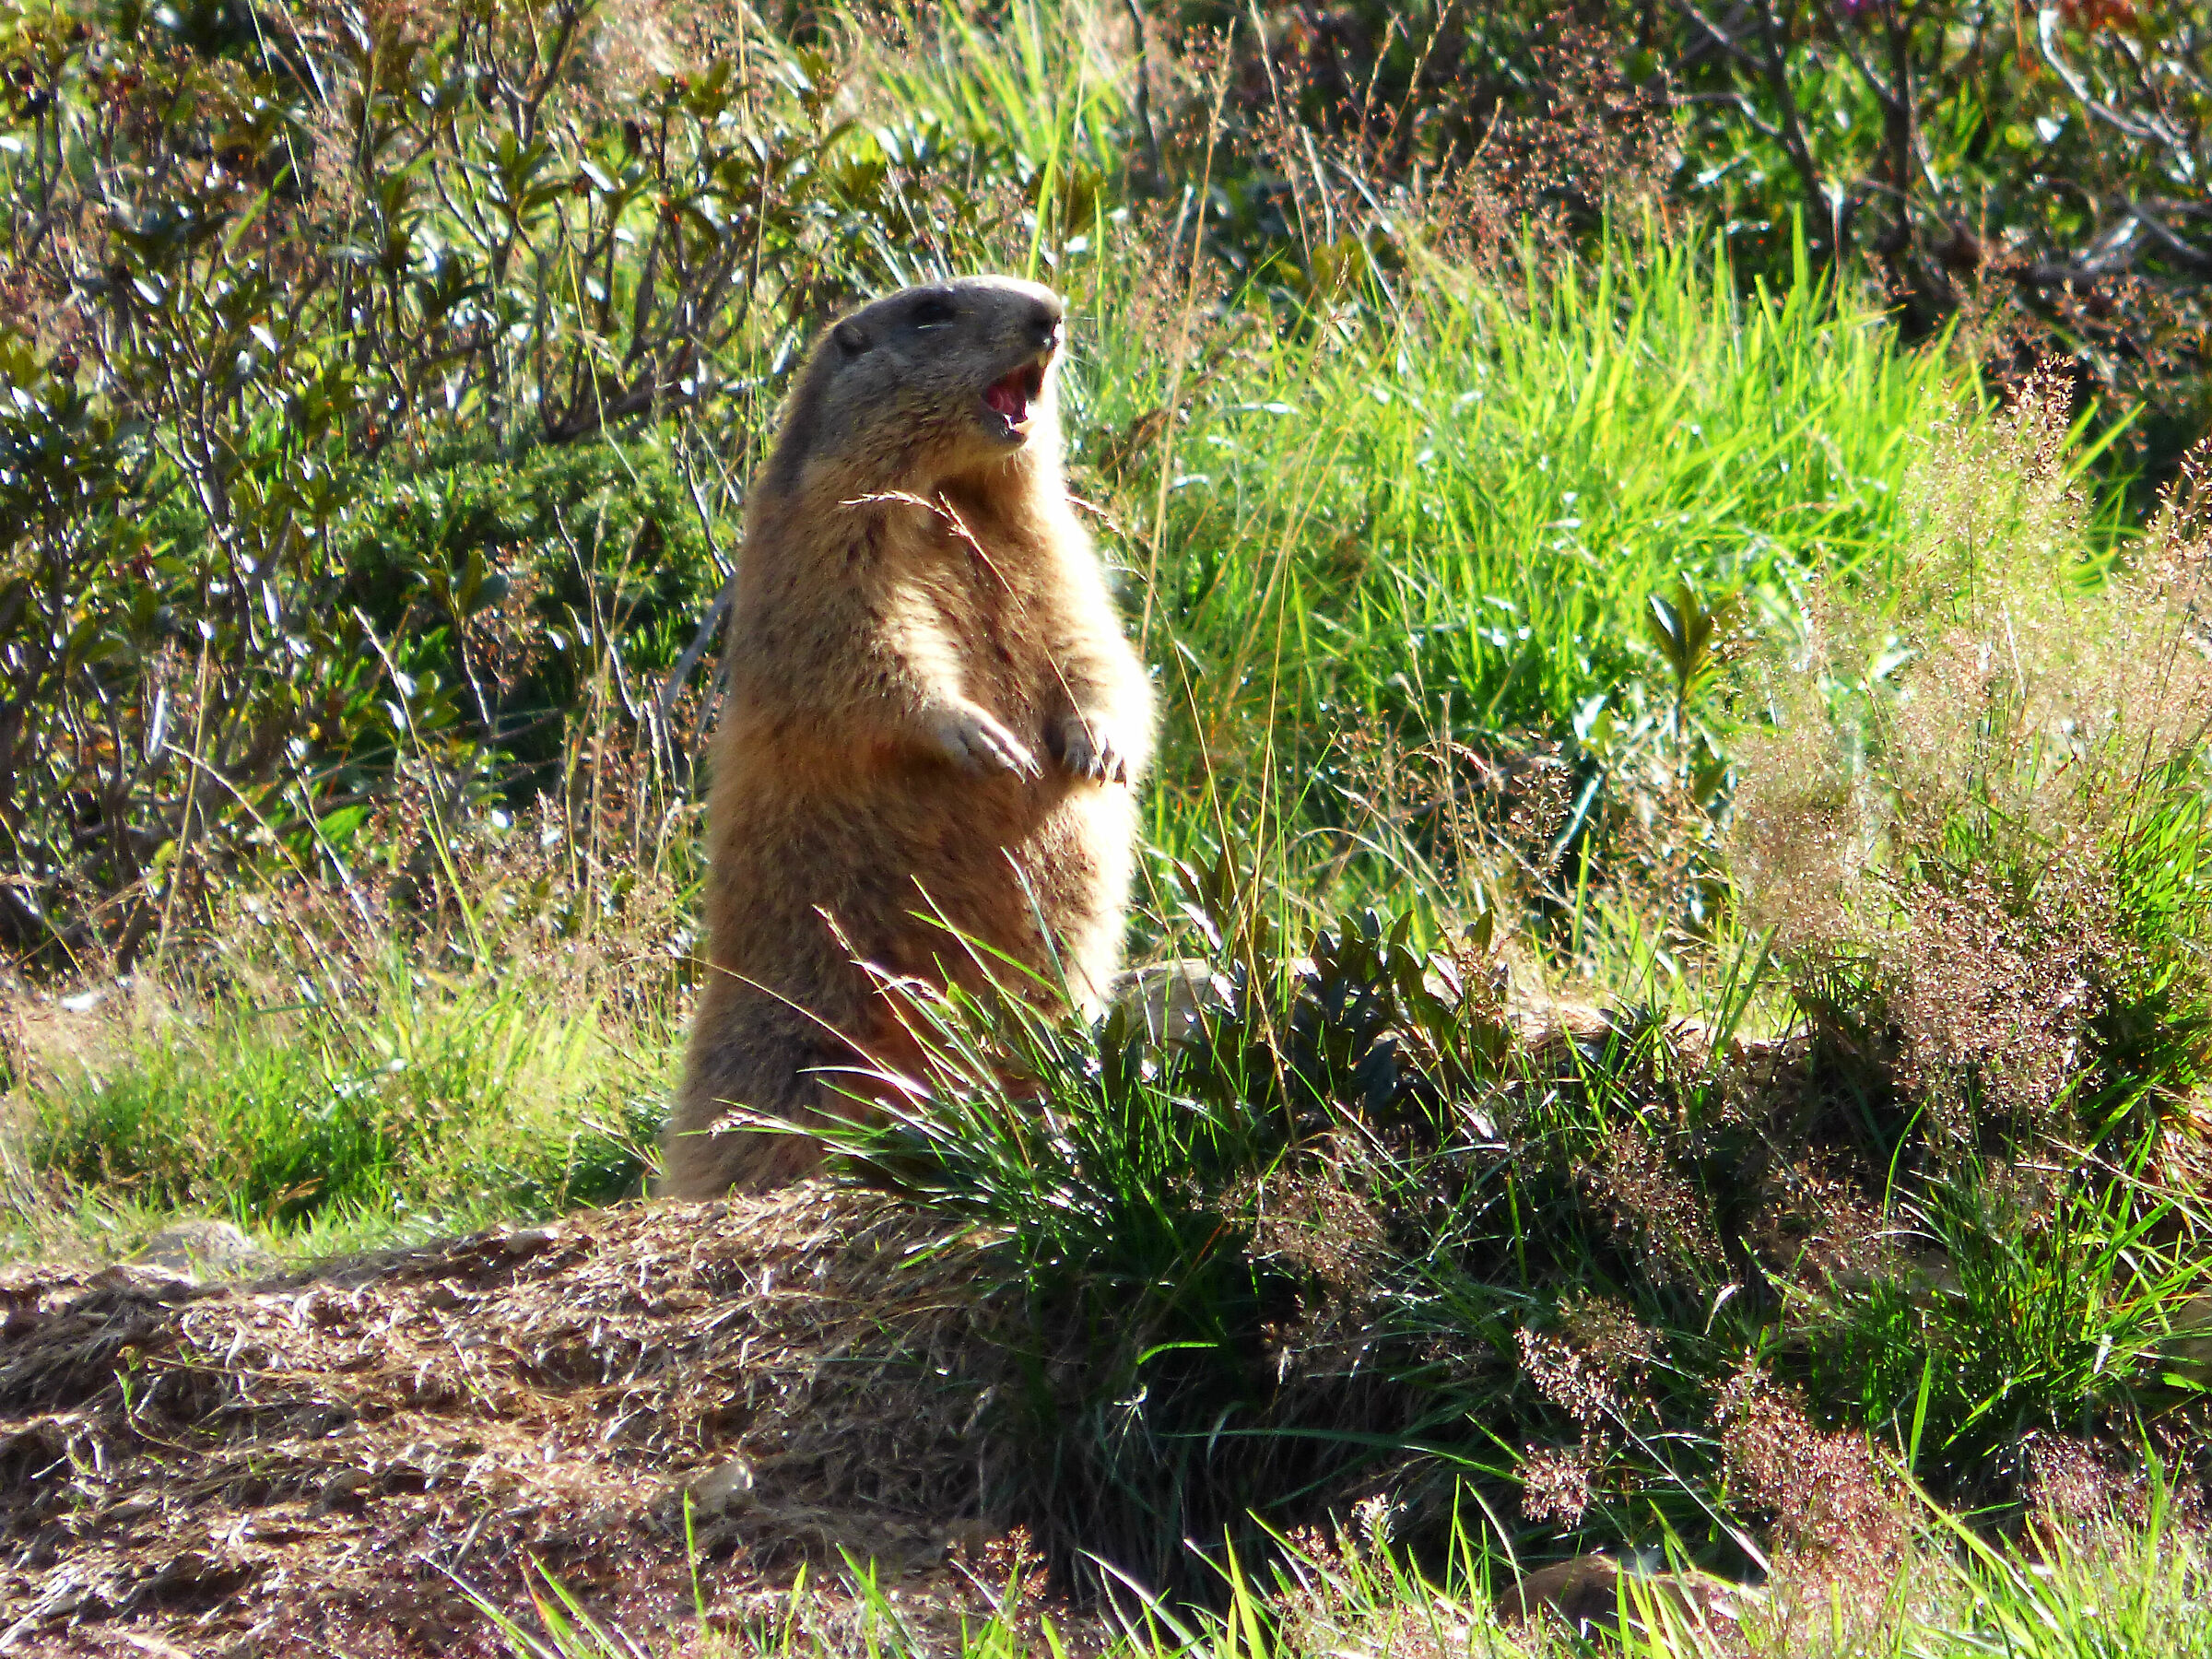 The Call of the Marmot...